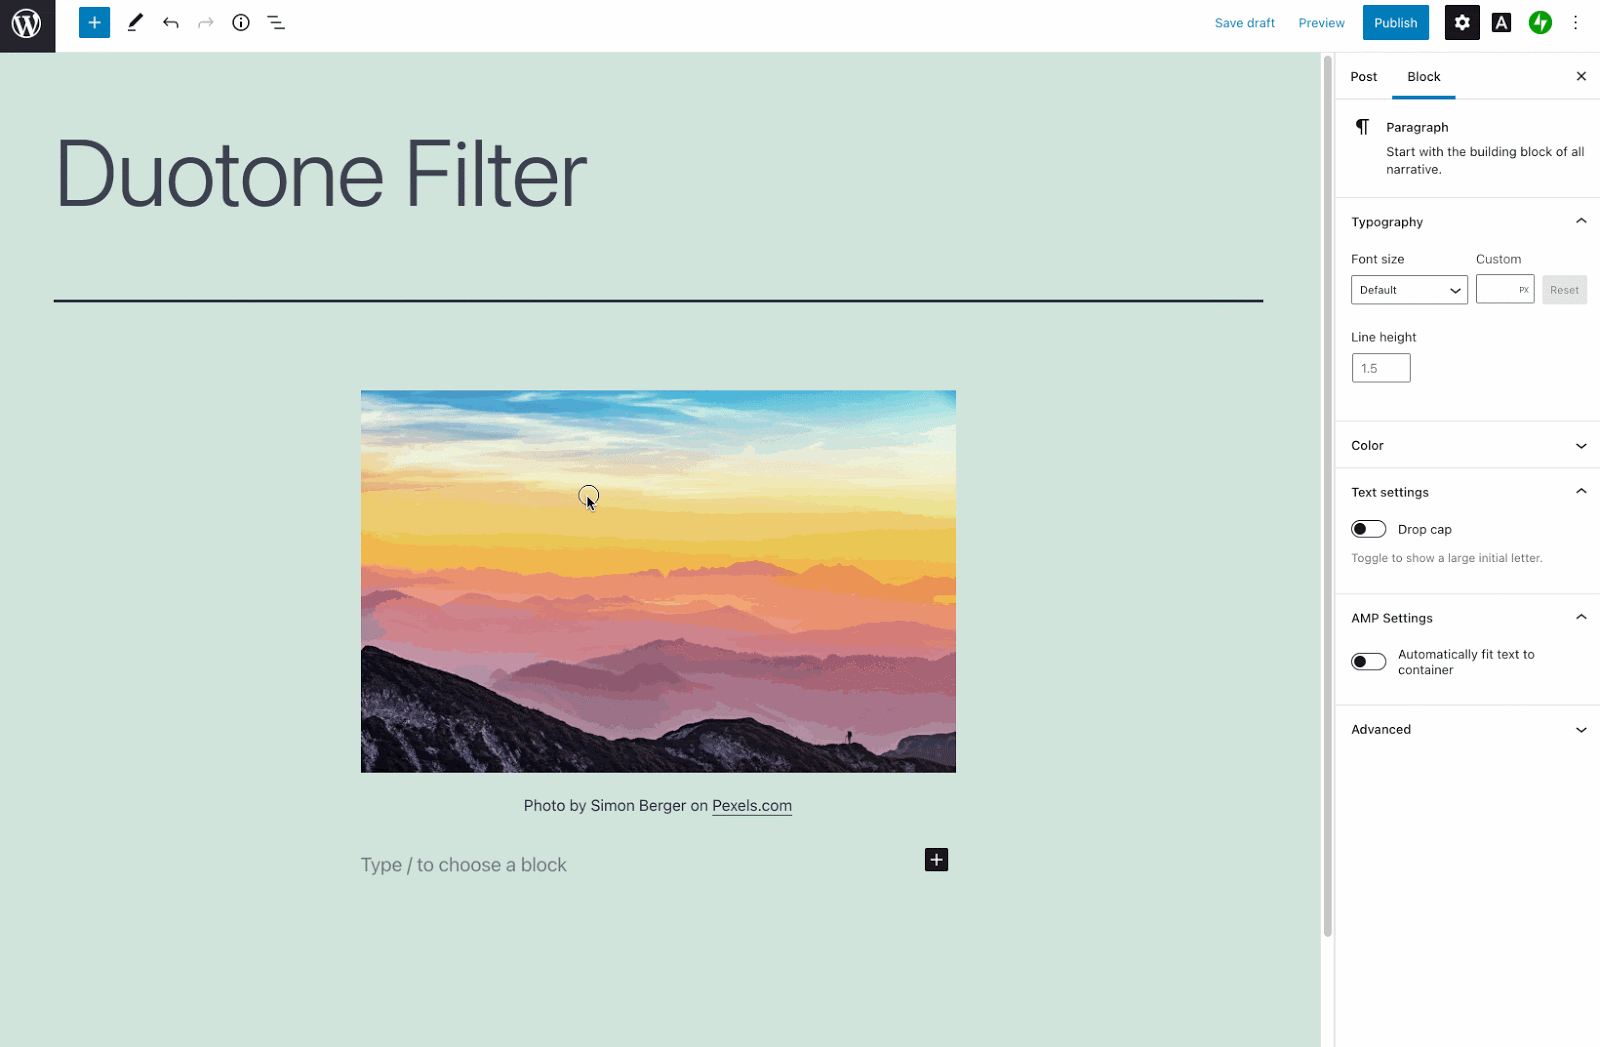 built-in-duotone-image-filter-editor-navigation-via-persistent-list-view-and-other-block-editor-improvements